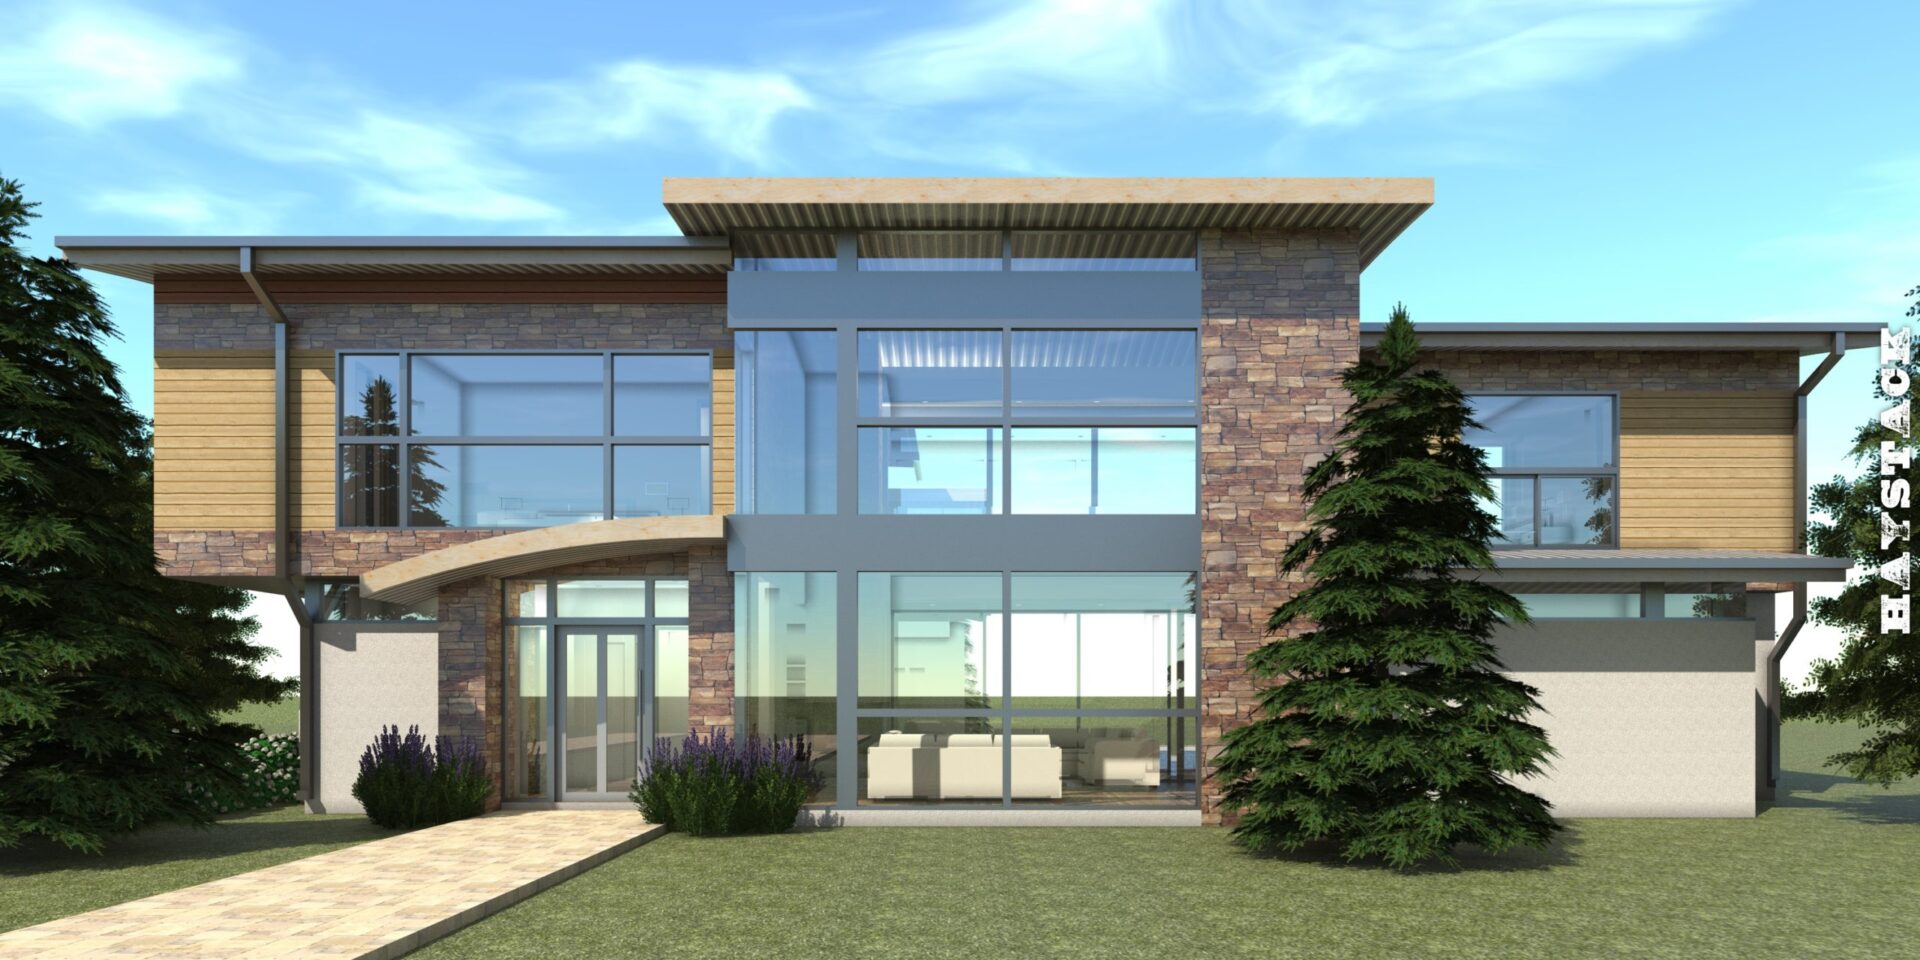 6 Bedroom Modern Home with Safe Room. Haystack by Tyree House Plans.